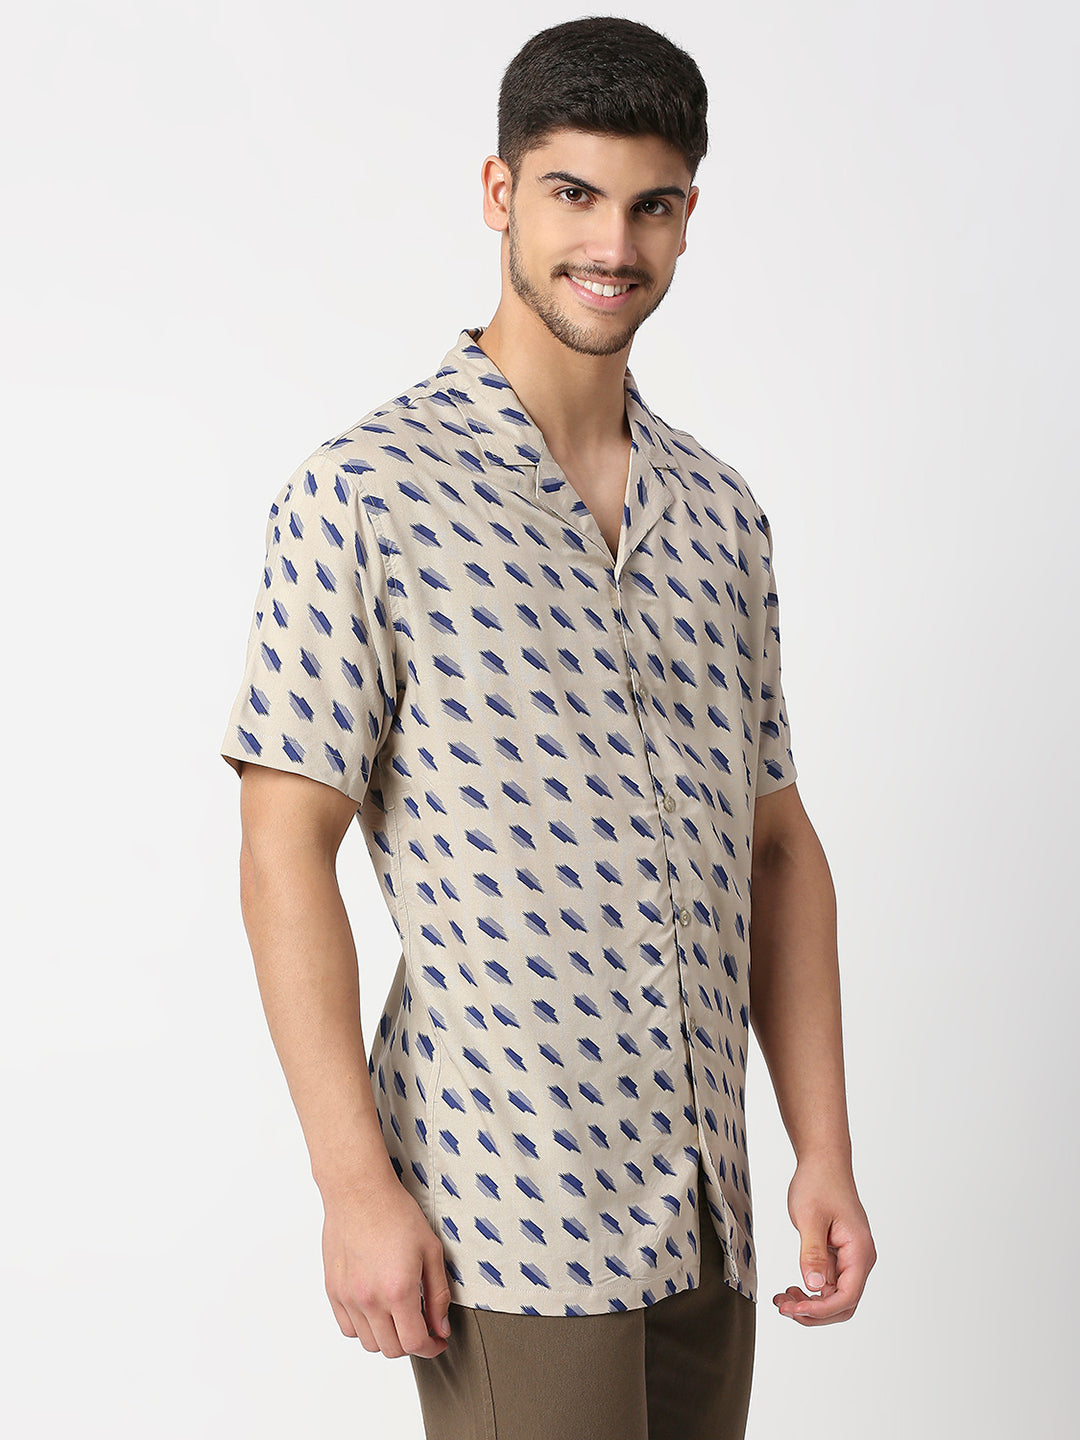 Stroke Grey Blue All-Over Printed Shirt